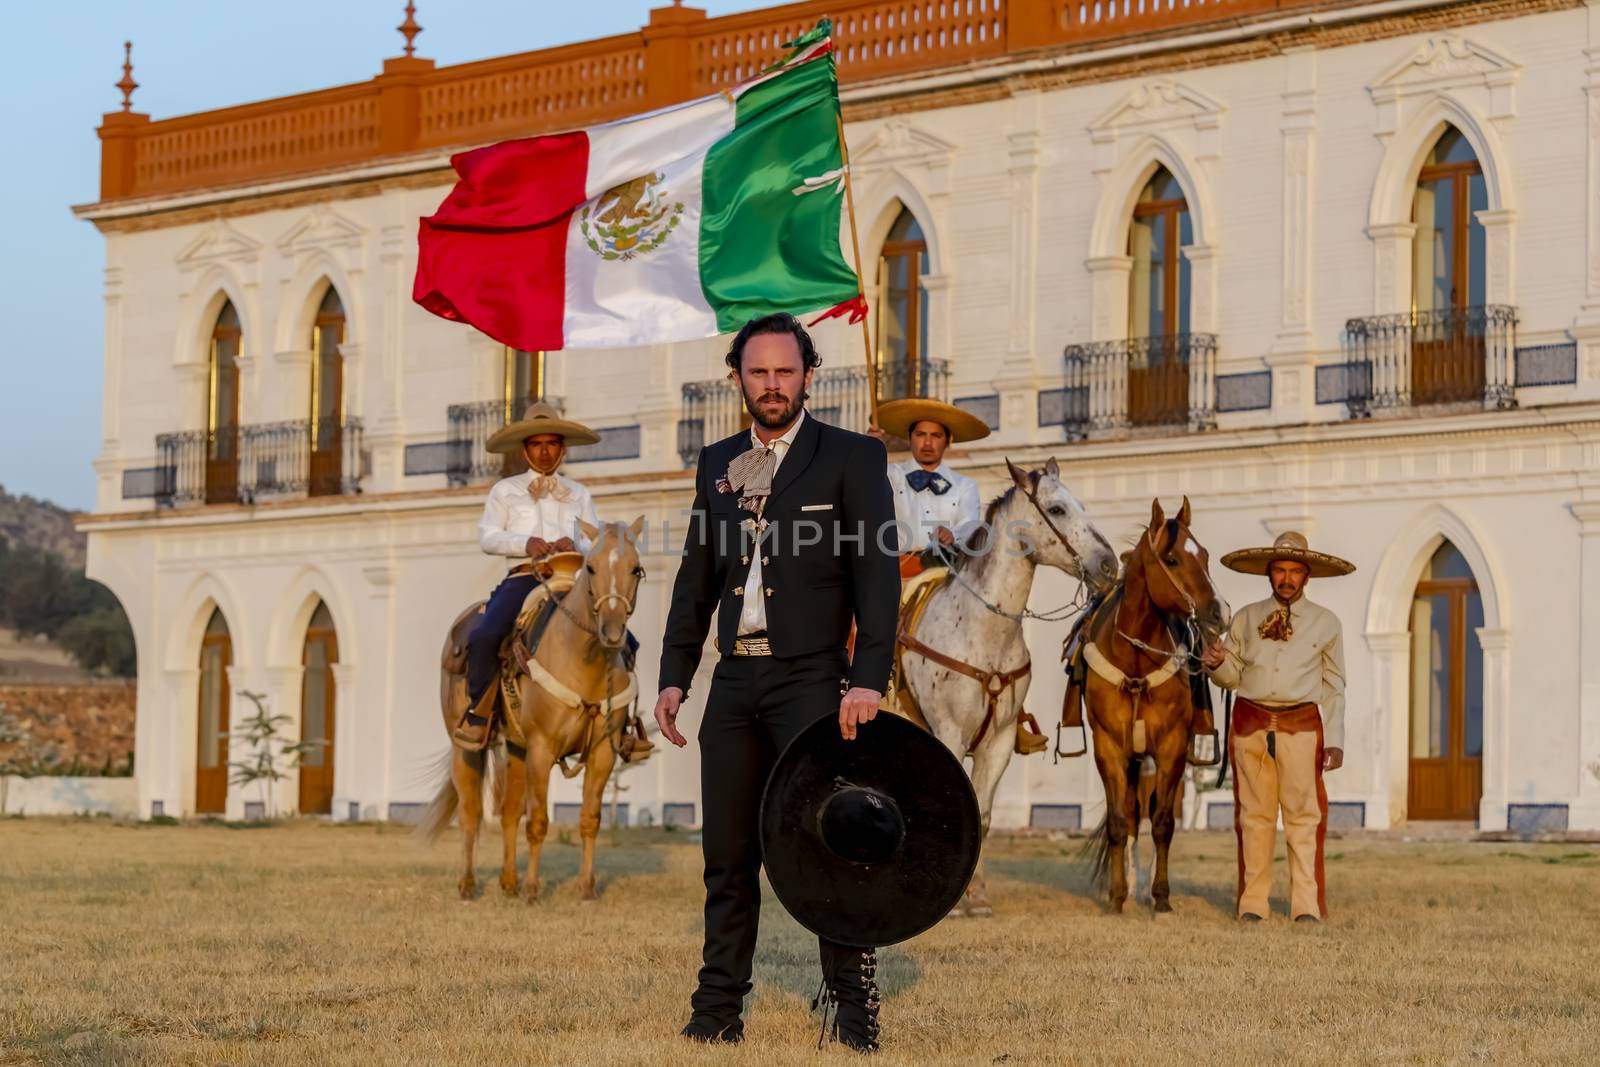 A Very Handsome Mexican Charro Poses In Front Of A Hacienda In The Mexican Countryside by actionsports